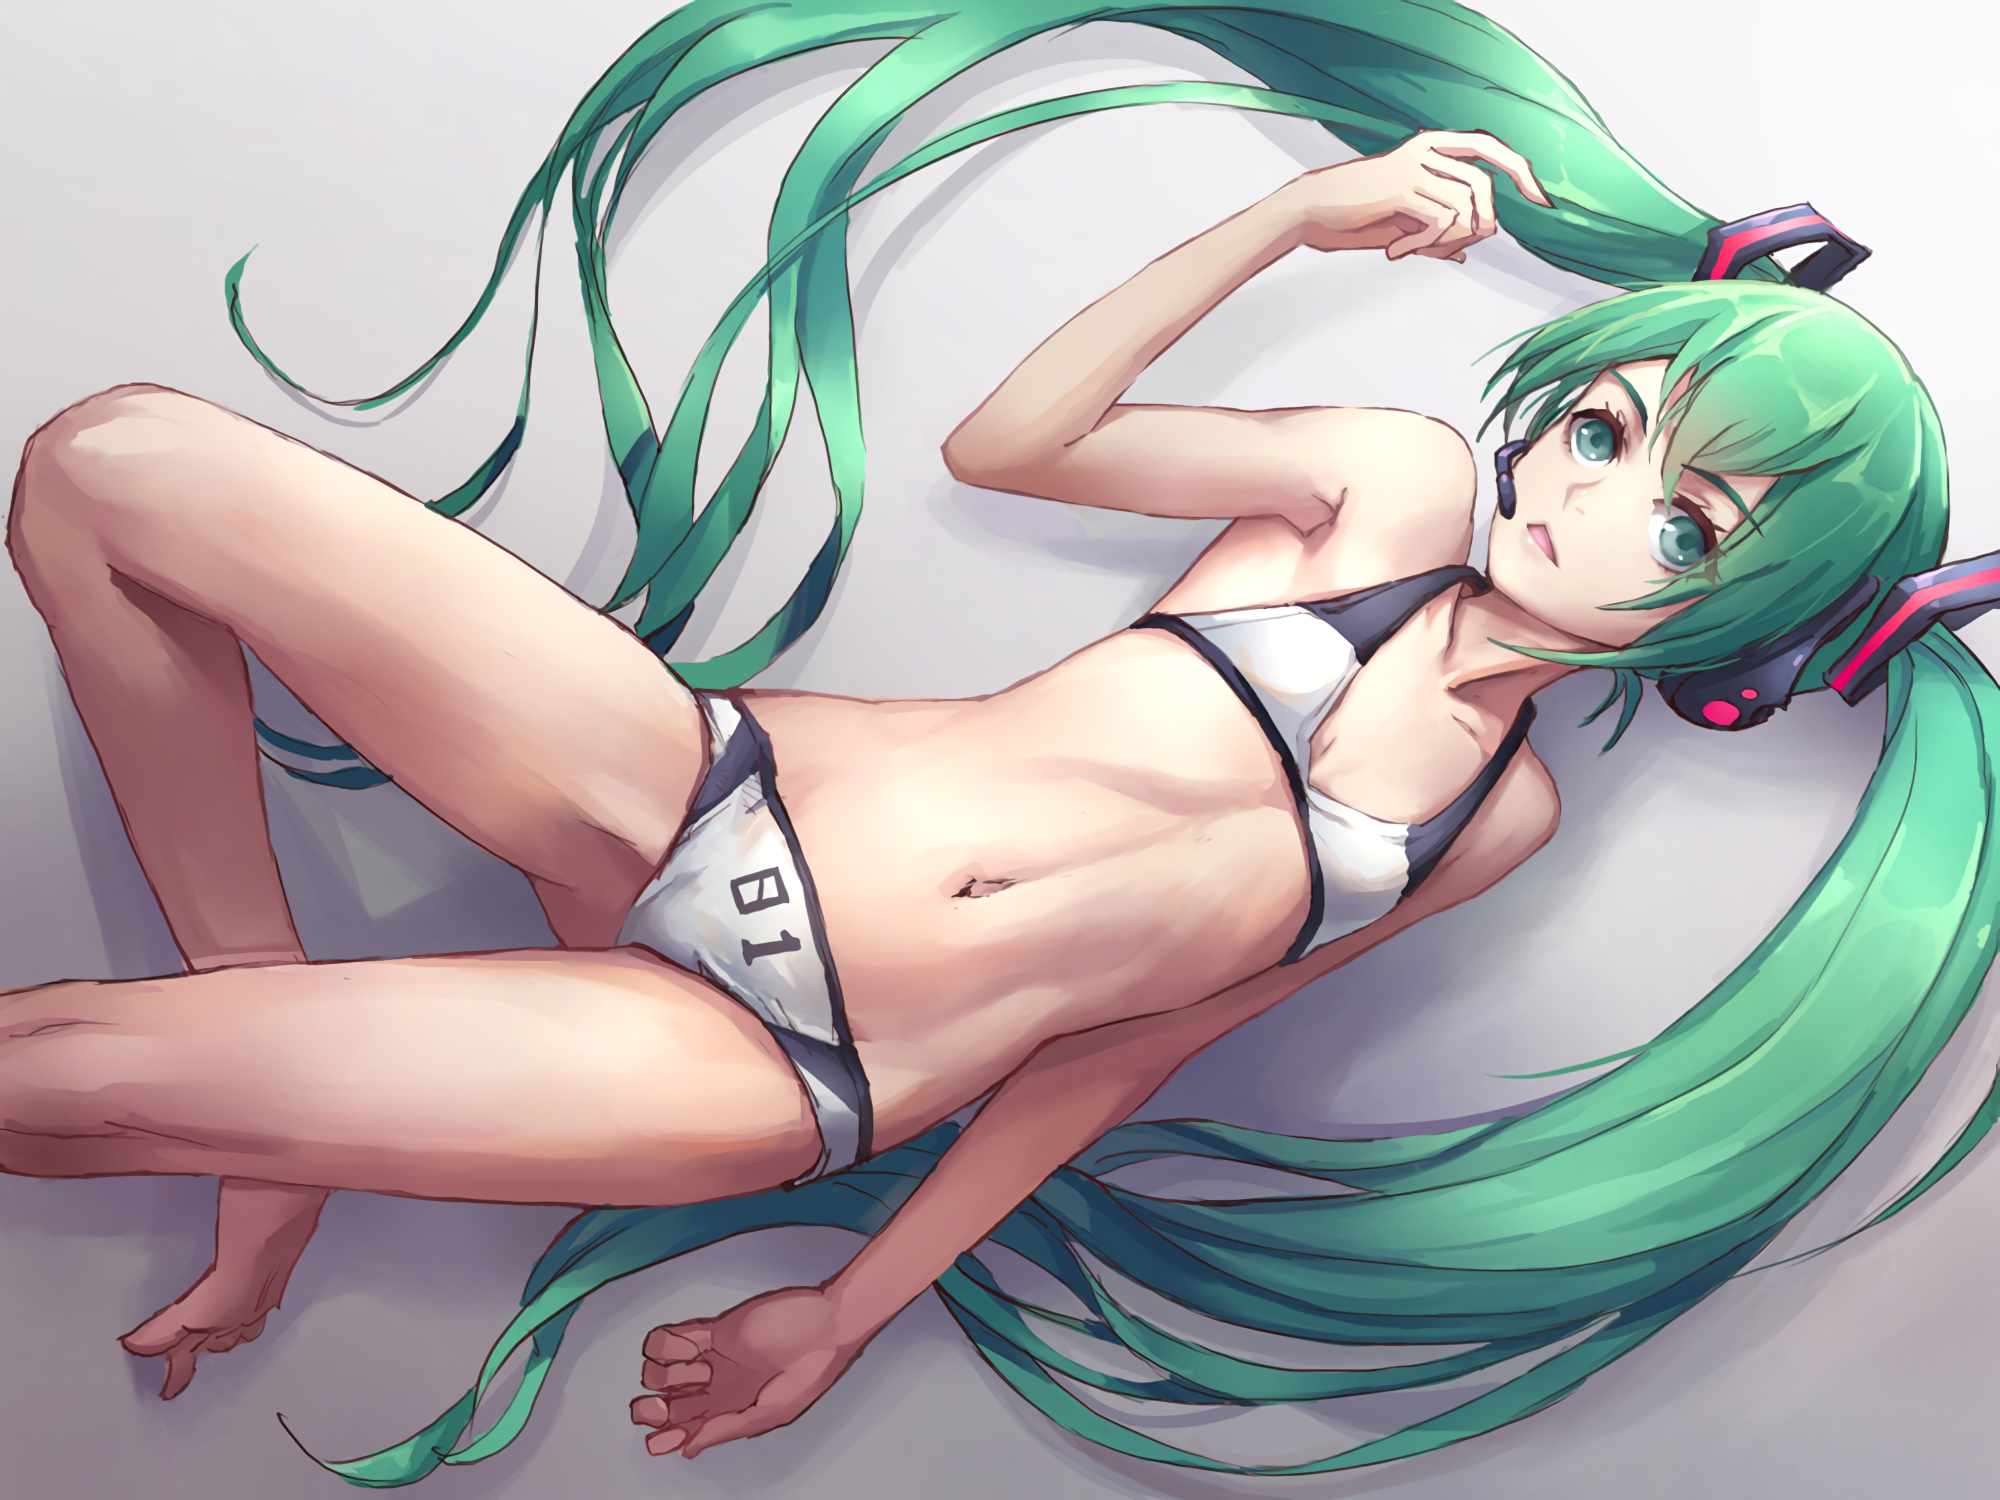 19493260. 39 Music is a good song, but I prefer my Miku to make me want to ...